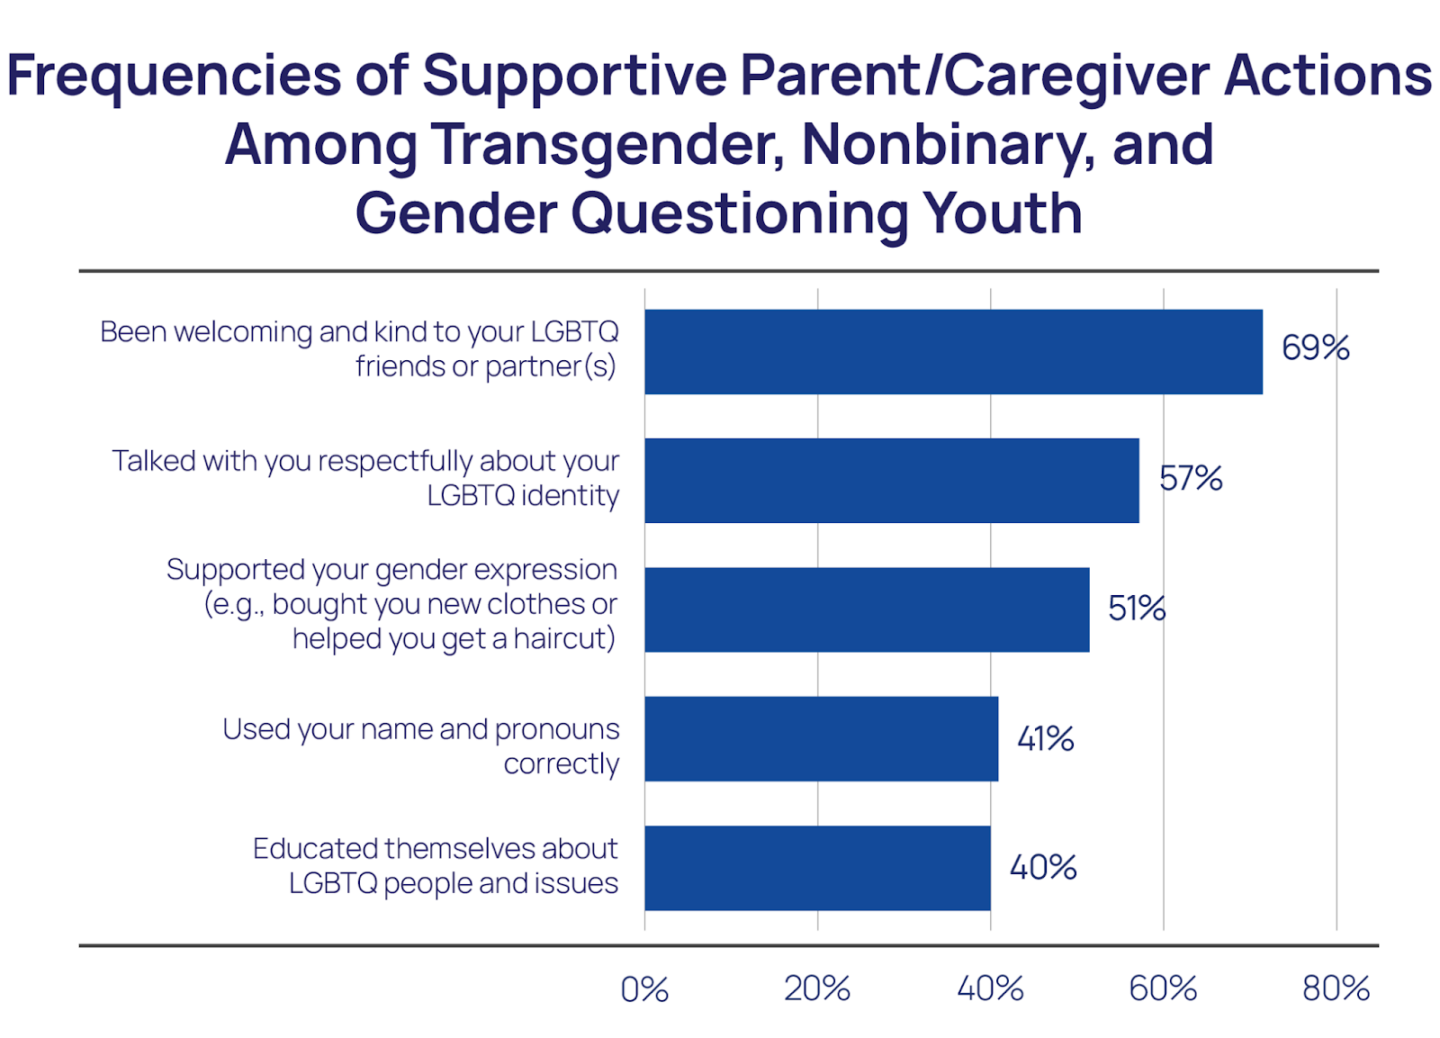 Frequencies of Supportive Parent/Caregiver Actions Among Transgender, Nonbinary, and Gender Questioning Youth Bar Chart